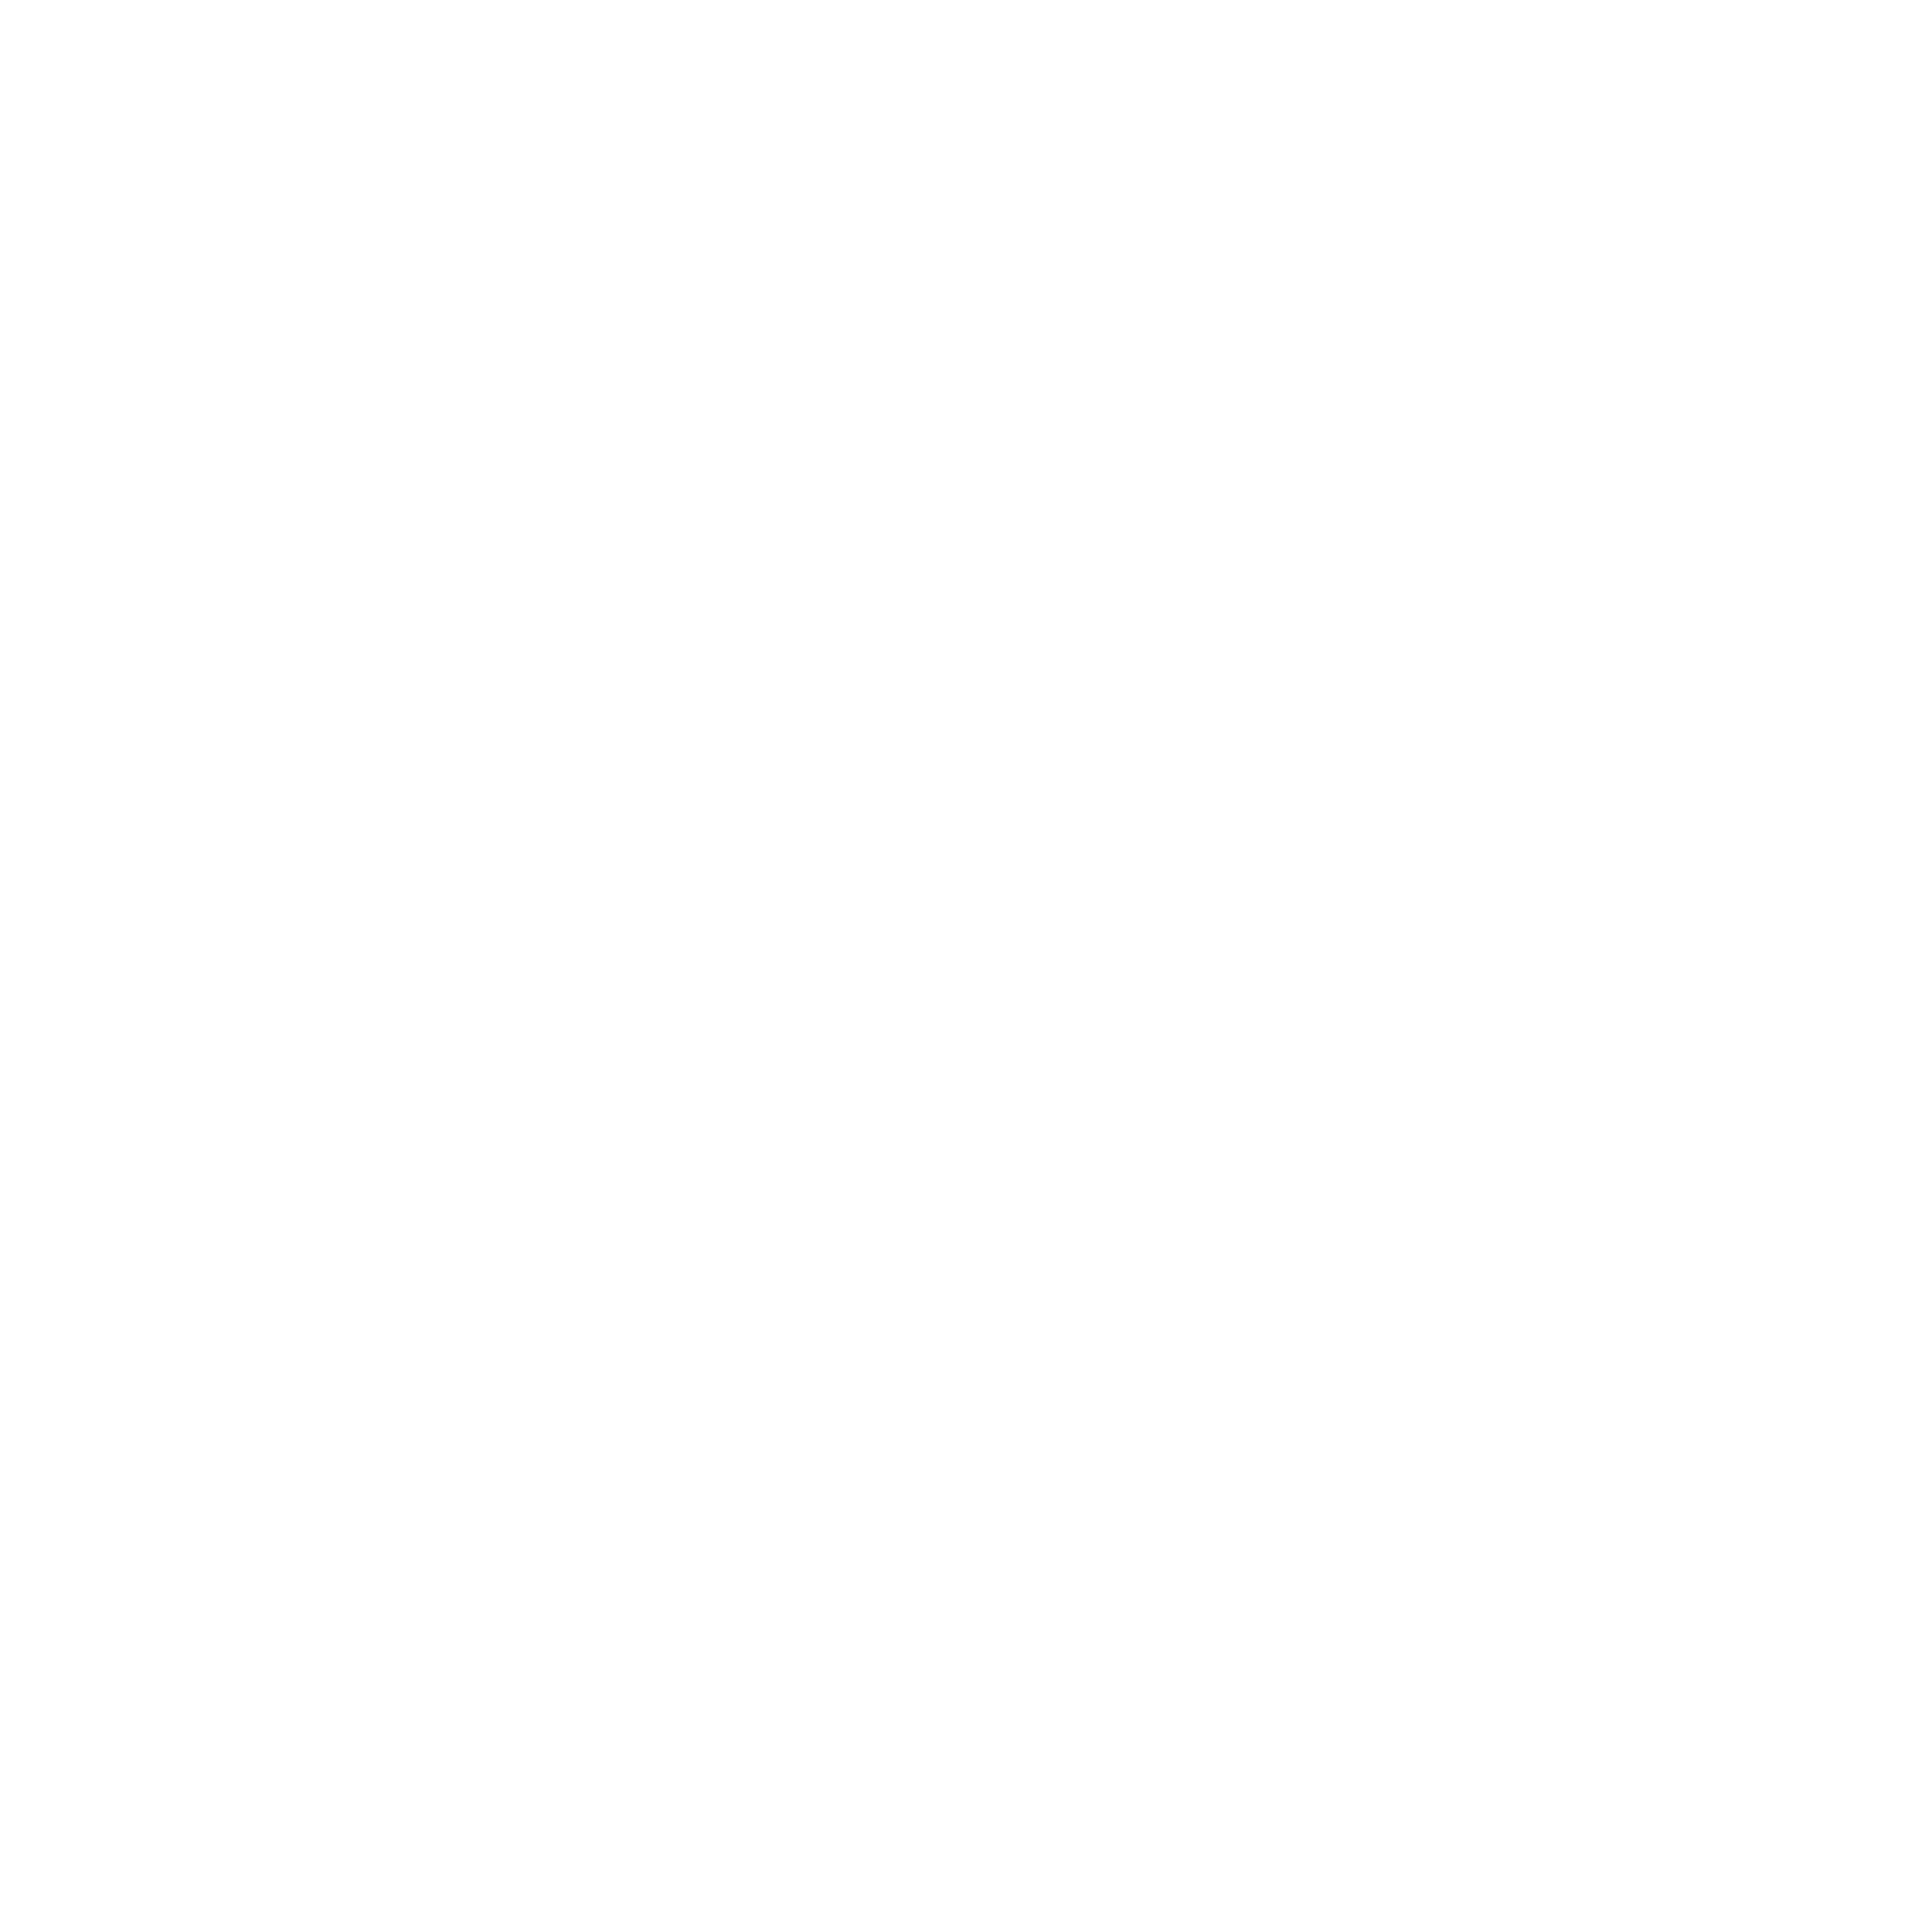 [CITYPNG.COM]HD White Instagram Round Logo Icon PNG - 2000x2000.png